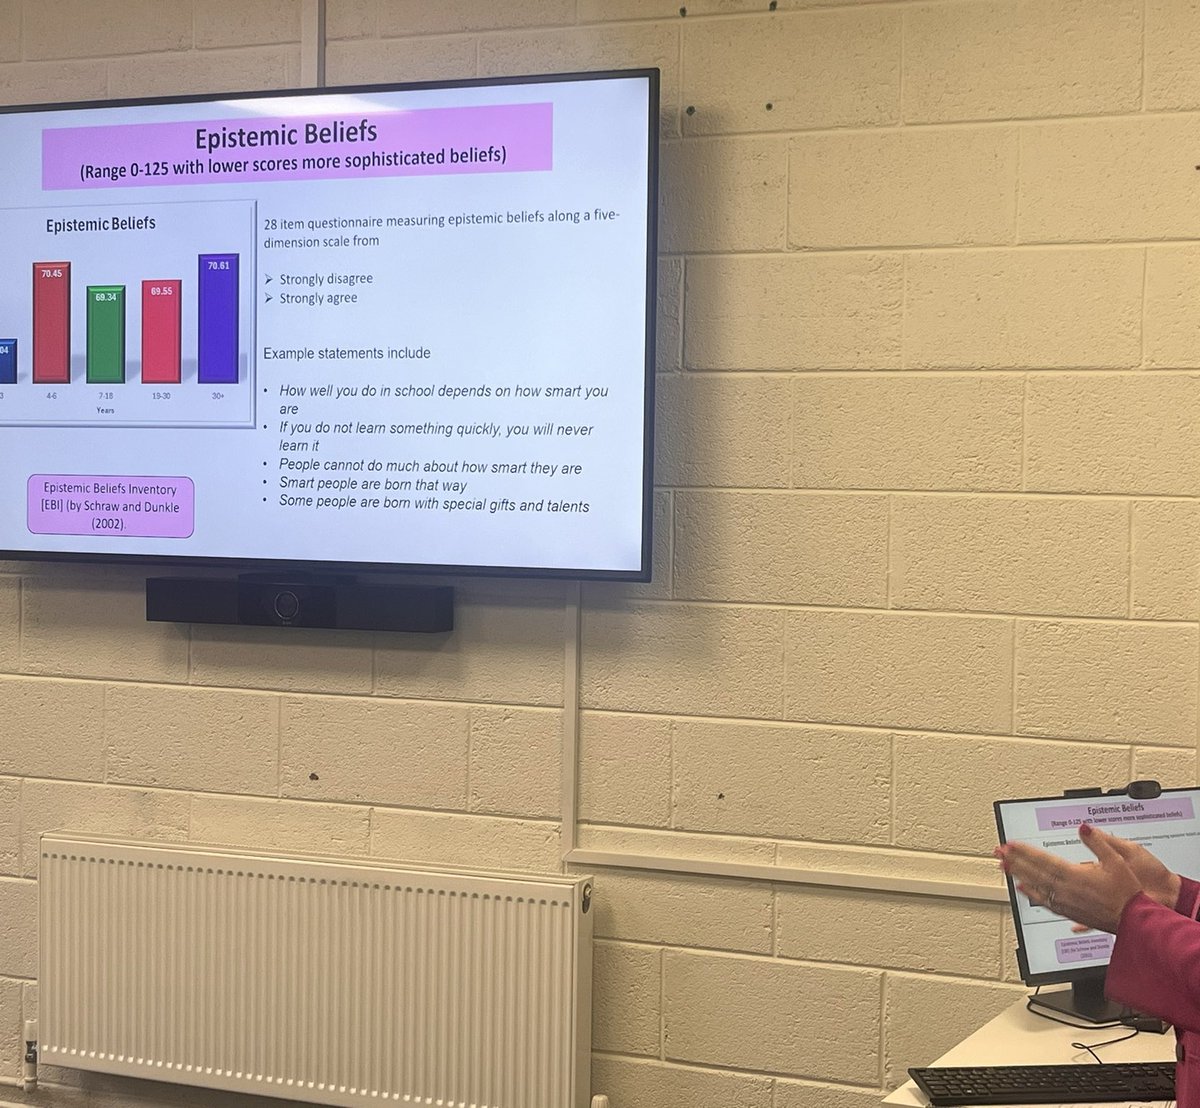 Great to get an opportunity to present some preliminary findings from my study this evening. Thanks @edtechne for providing the space for supportive engaging discussions and feedback.